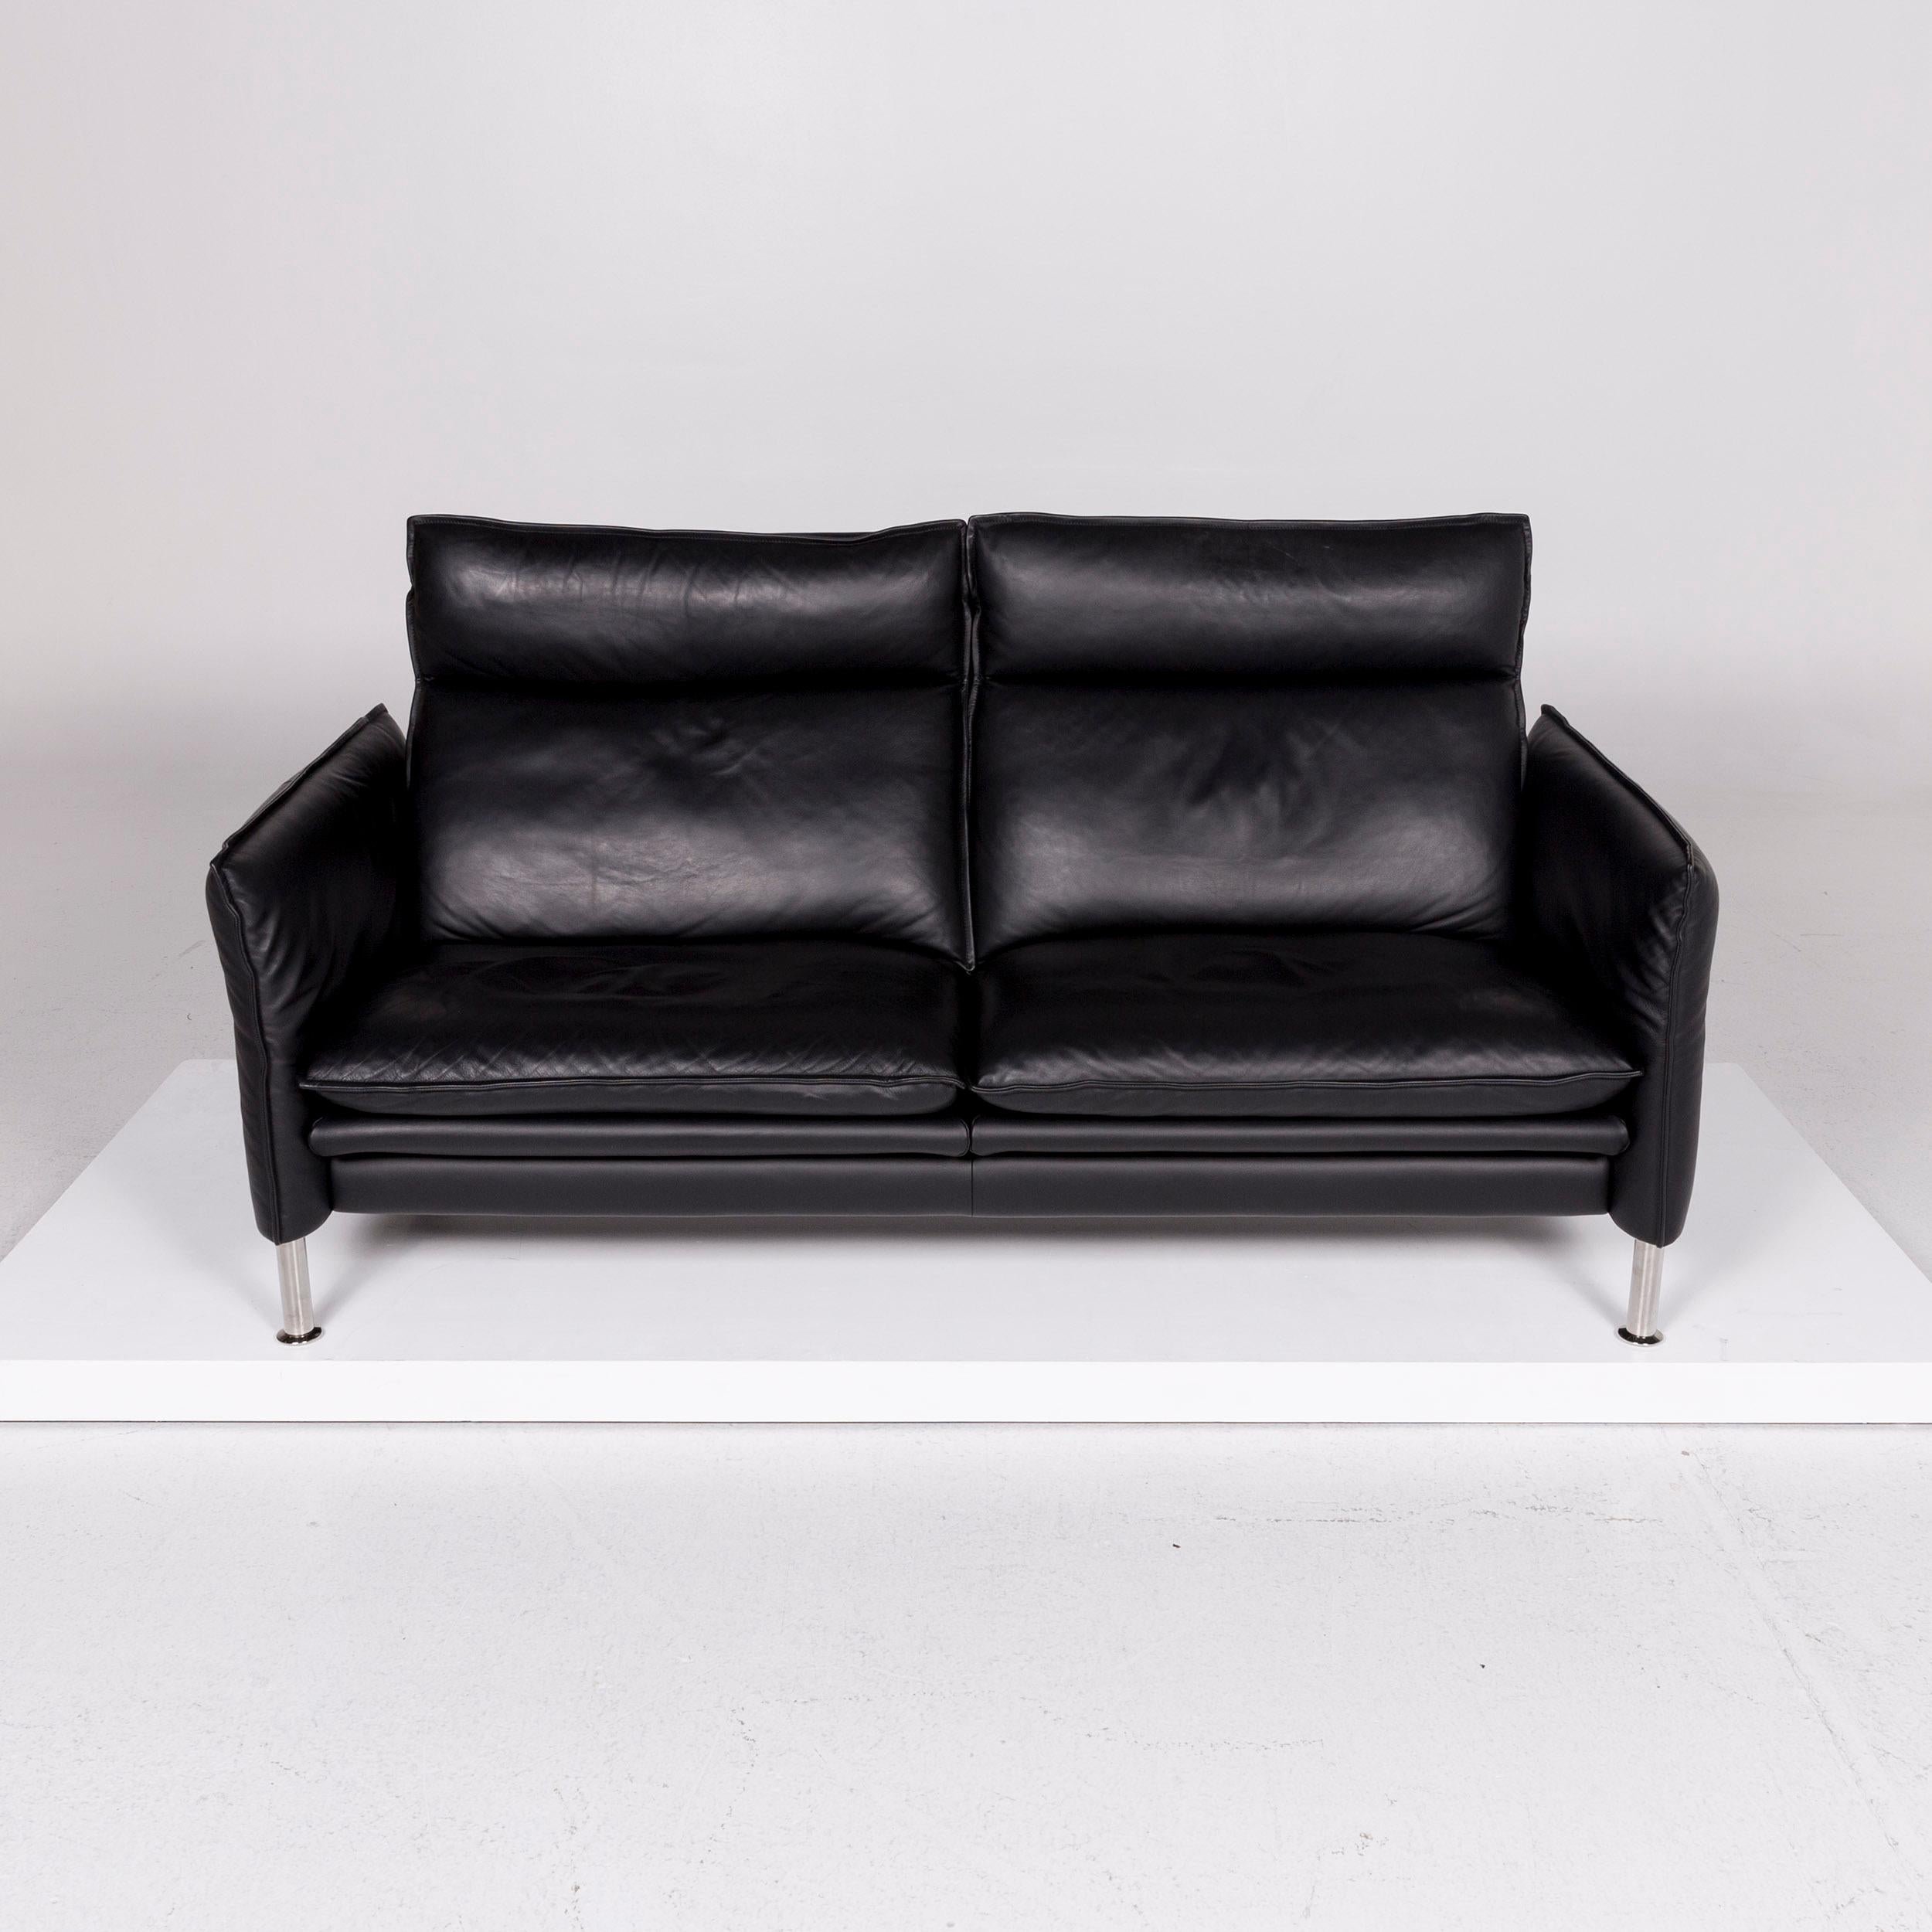 Erpo Porto Leather Sofa Black Two-Seat Relax Function Couch 1